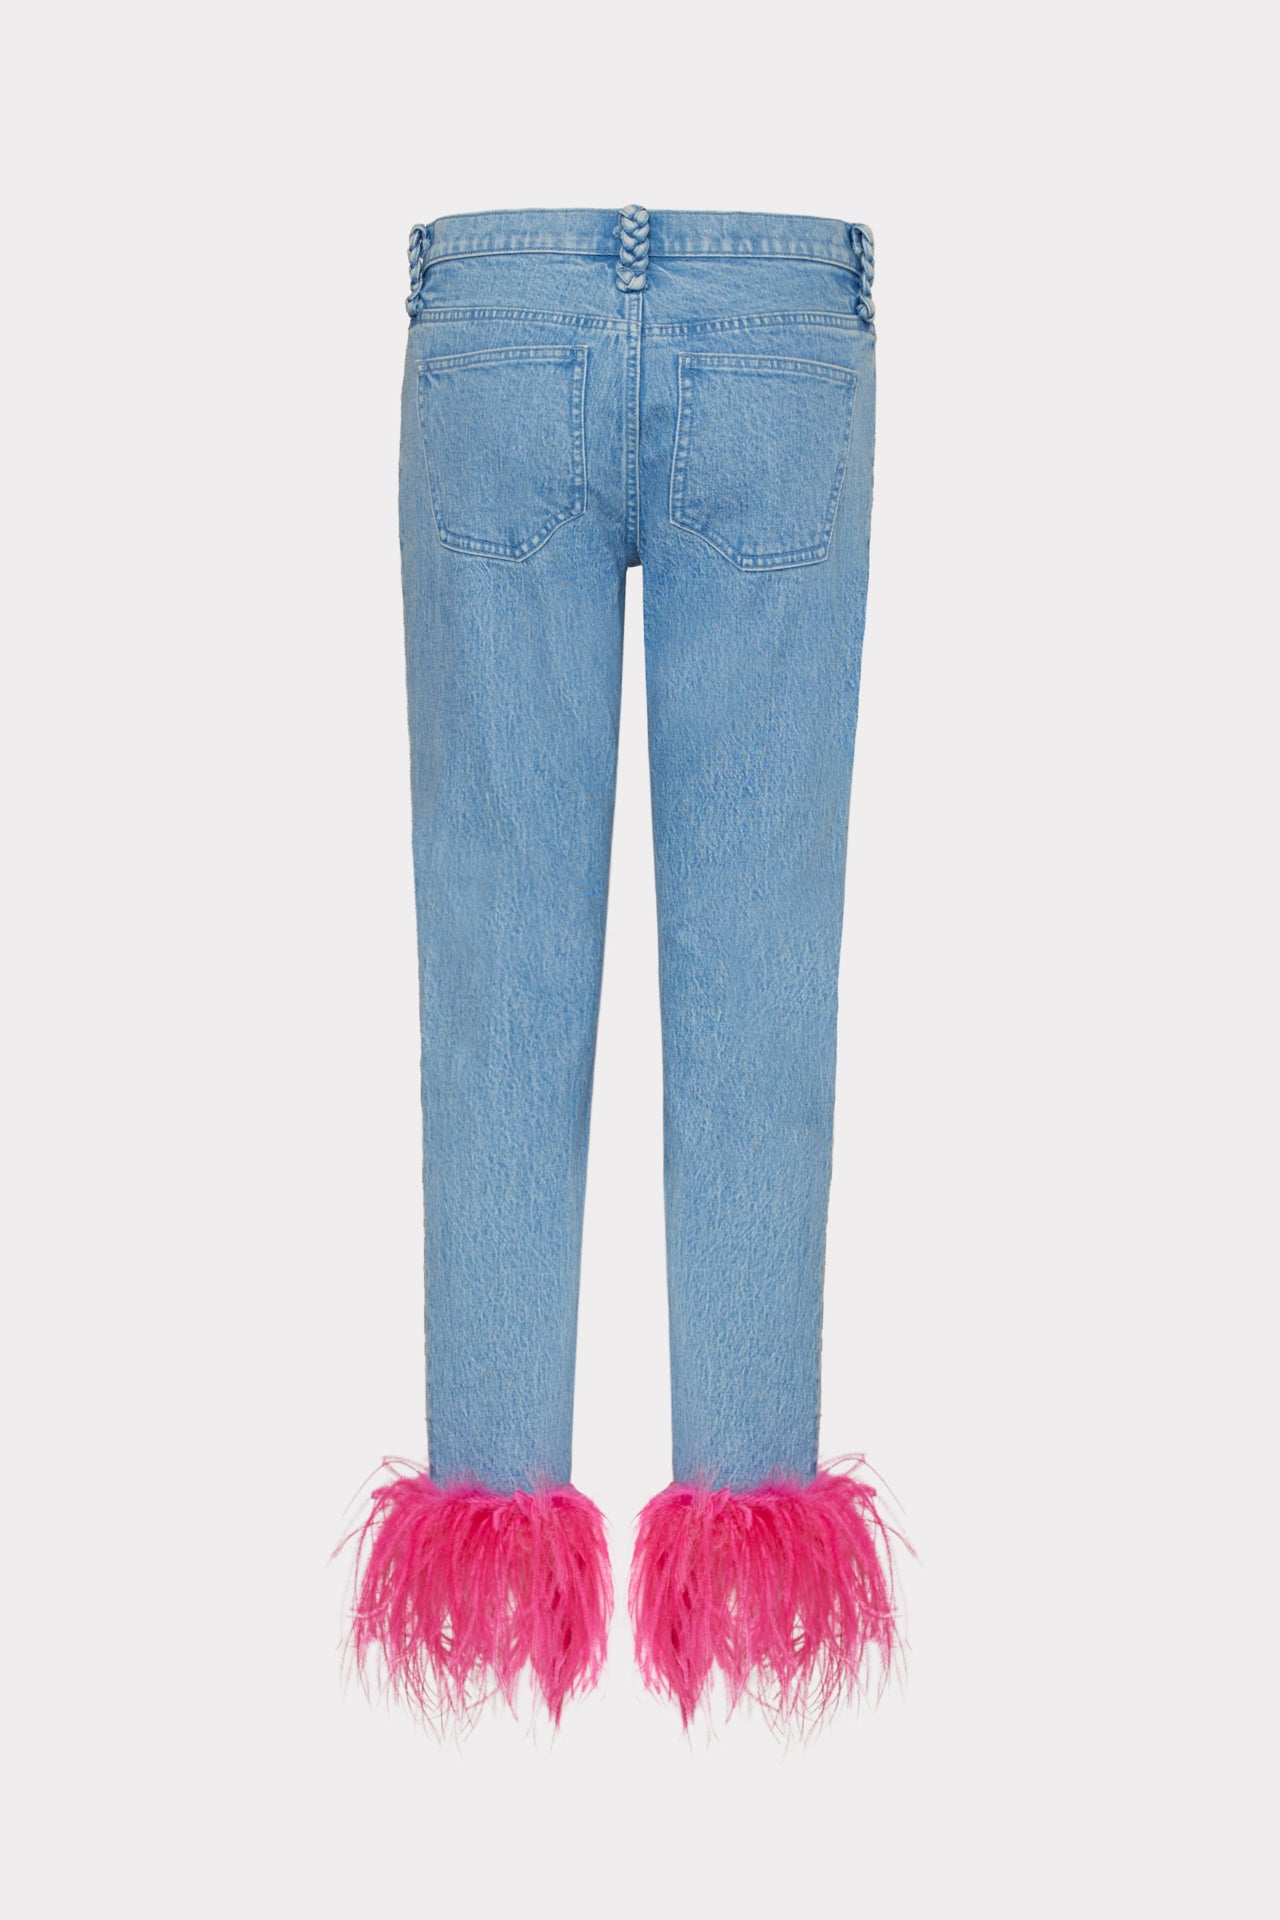 Gale Skinny Feather Jean